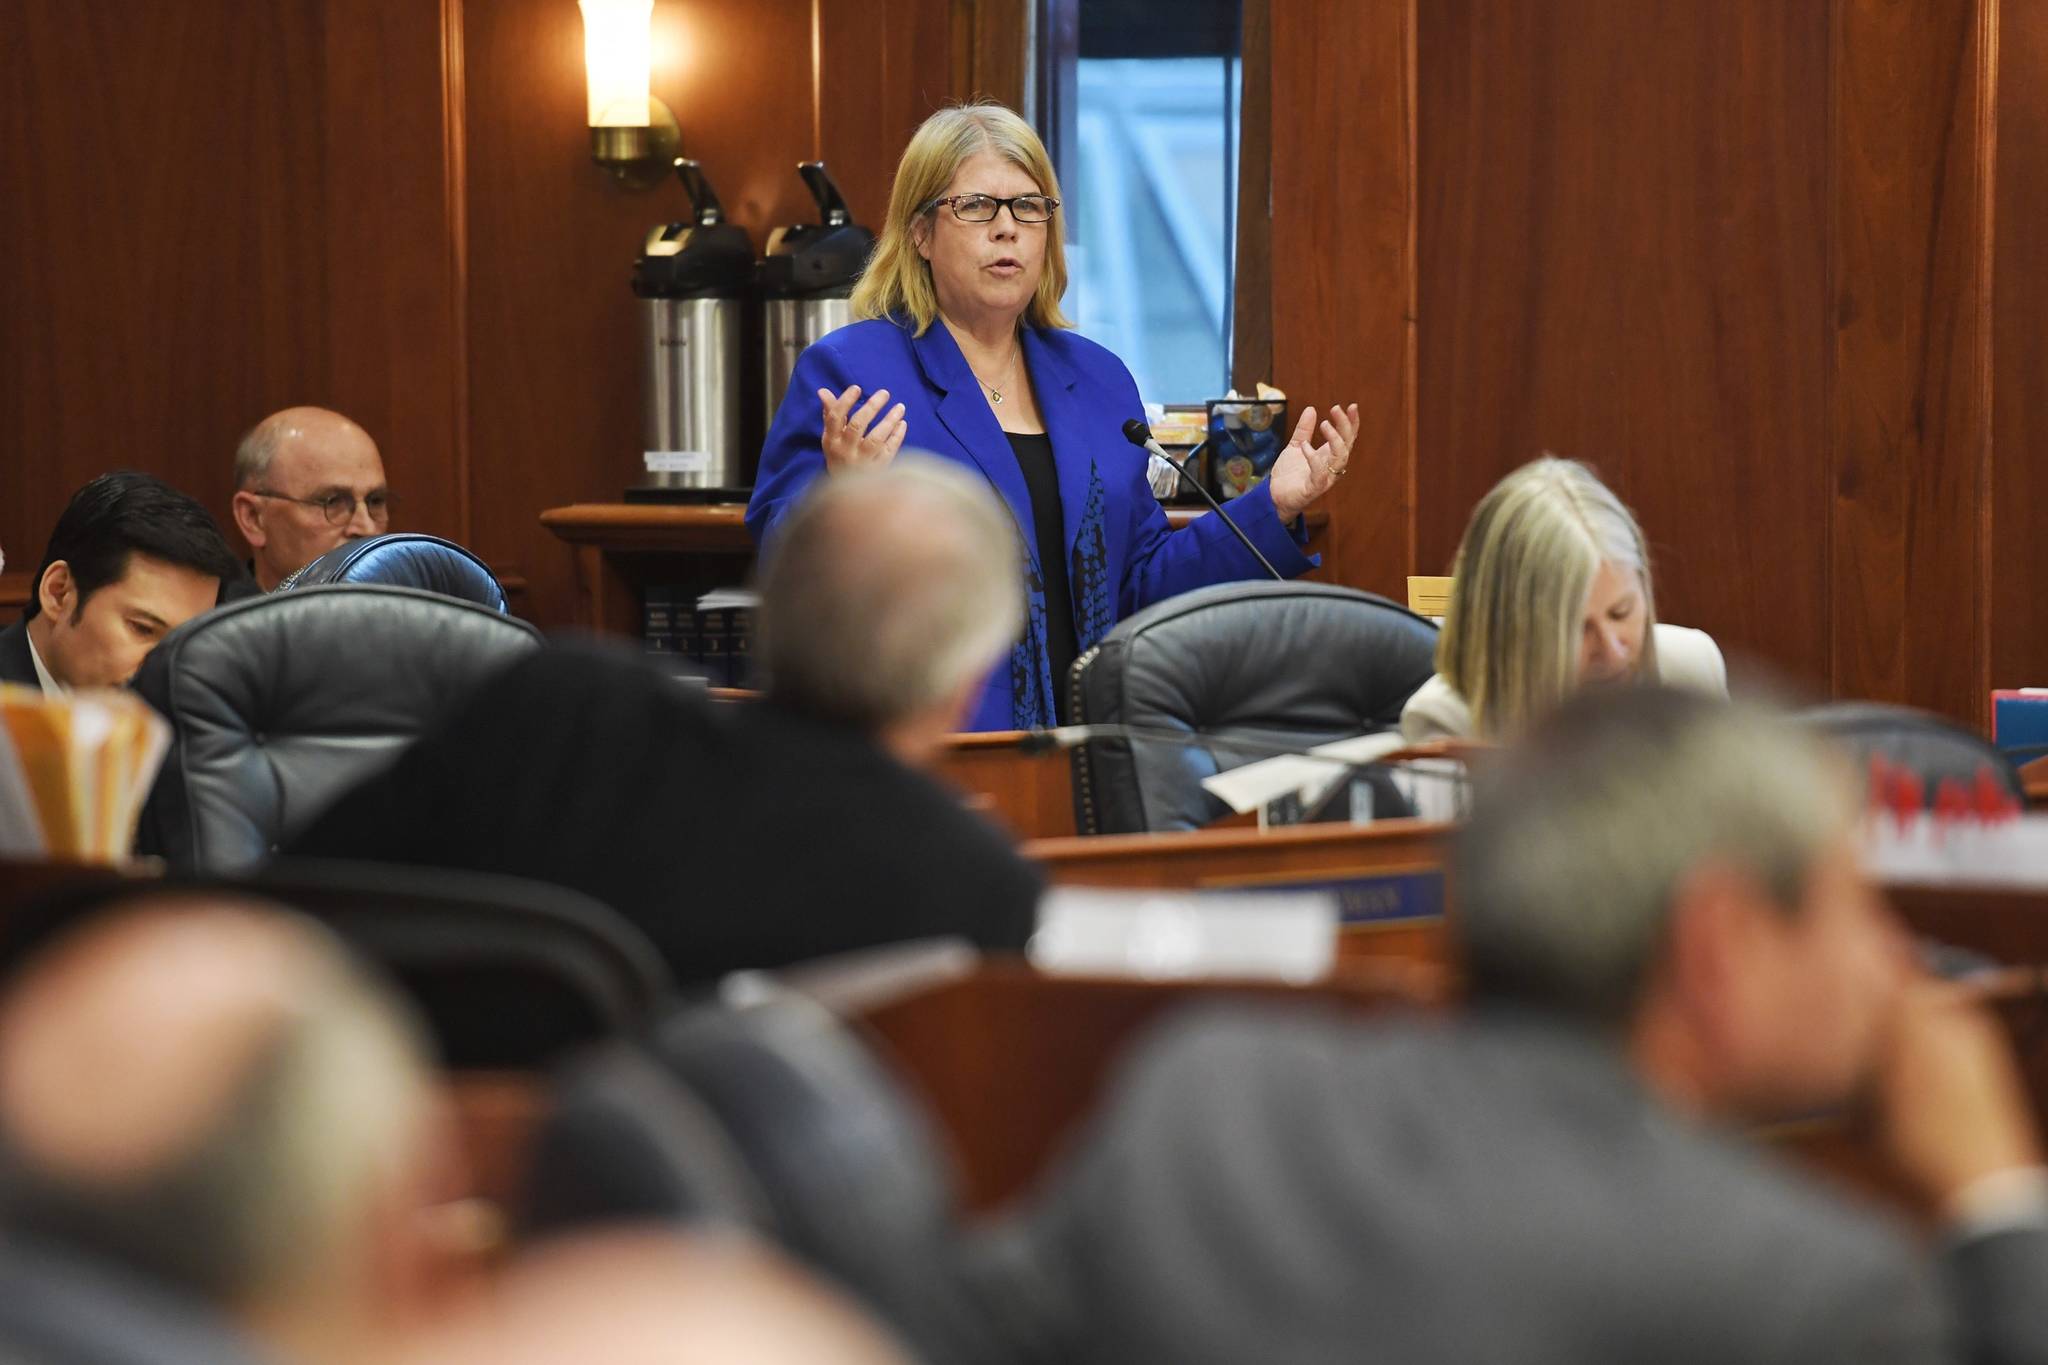 Rep. Tammie Wilson, R-North Pole, speaks against an override vote during a Joint Session of the Alaska Legislature to vote on an override of Gov. Mike Dunleavy’s budget vetoes at the Capitol on Wednesday, July 10, 2019. (Michael Penn | Juneau Empire)